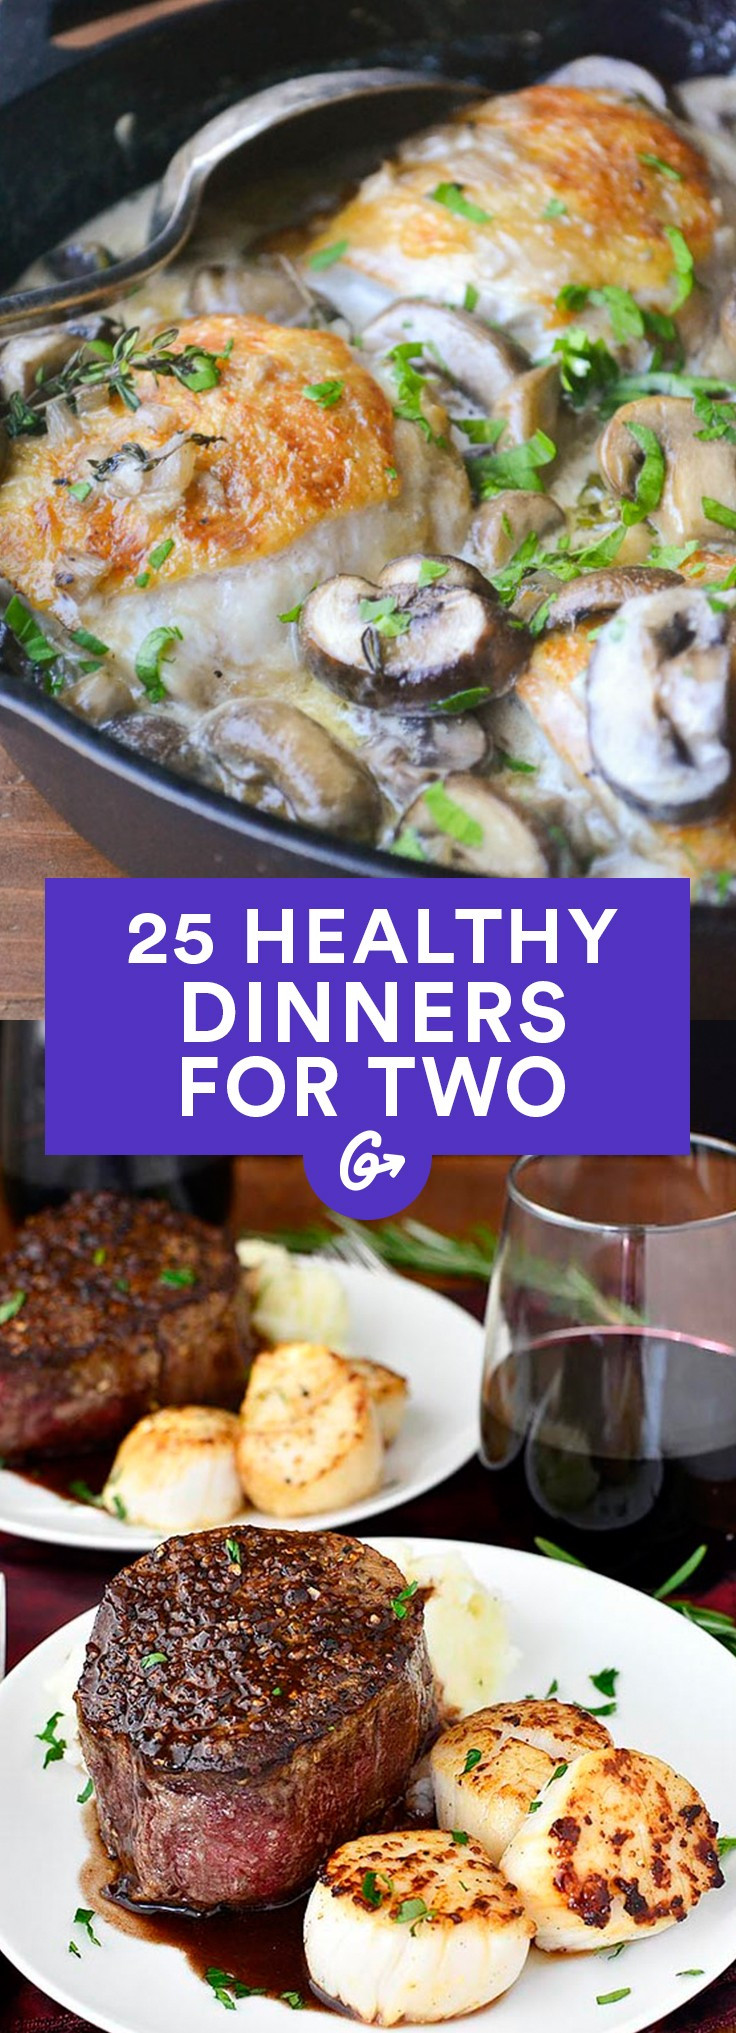 Dinners For Two
 Healthy Dinner Recipes for Two